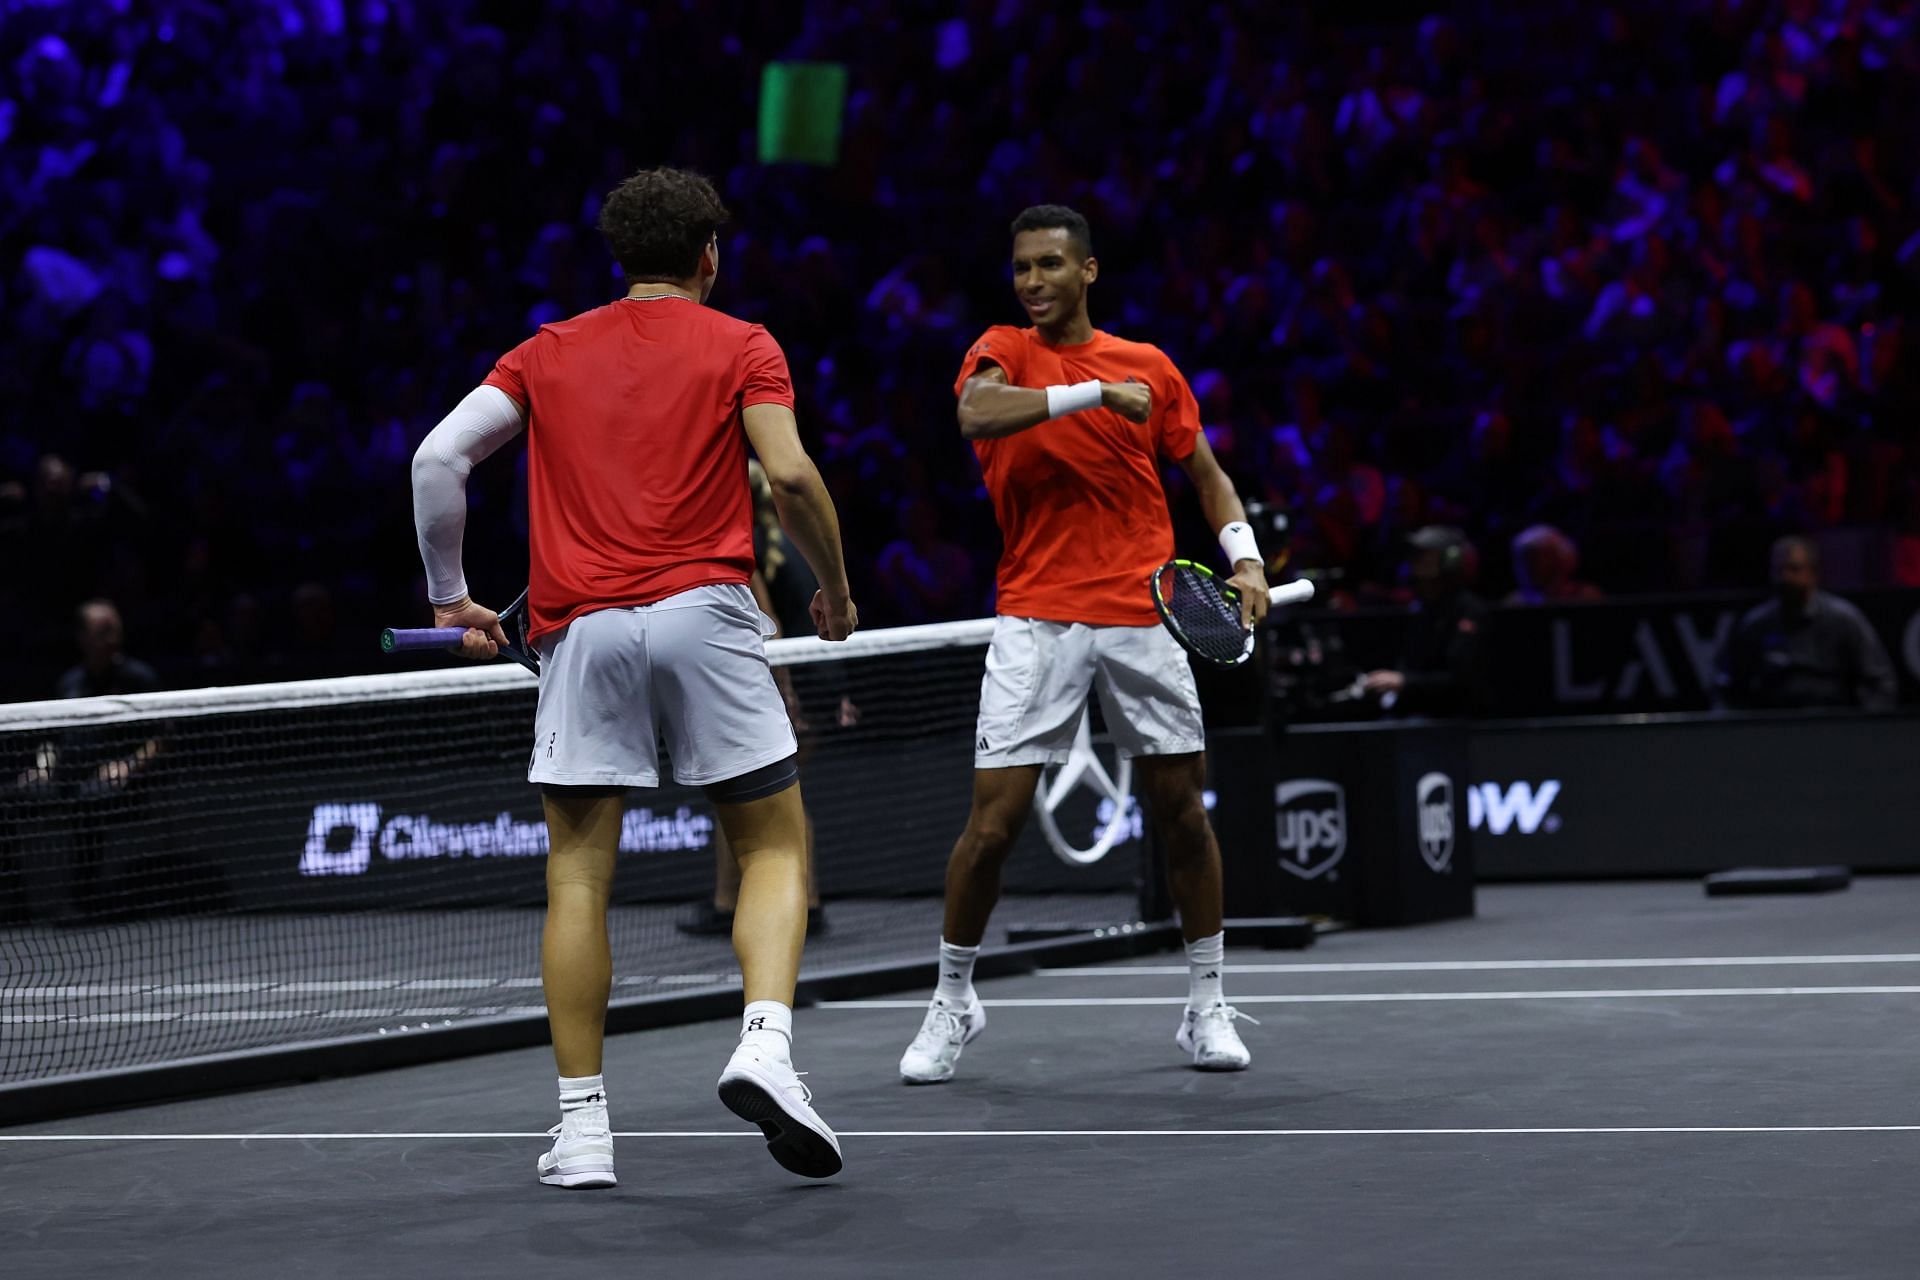 Laver Cup 2023 Schedule Today TV schedule, start time, order of play, live streaming details and more Day 3